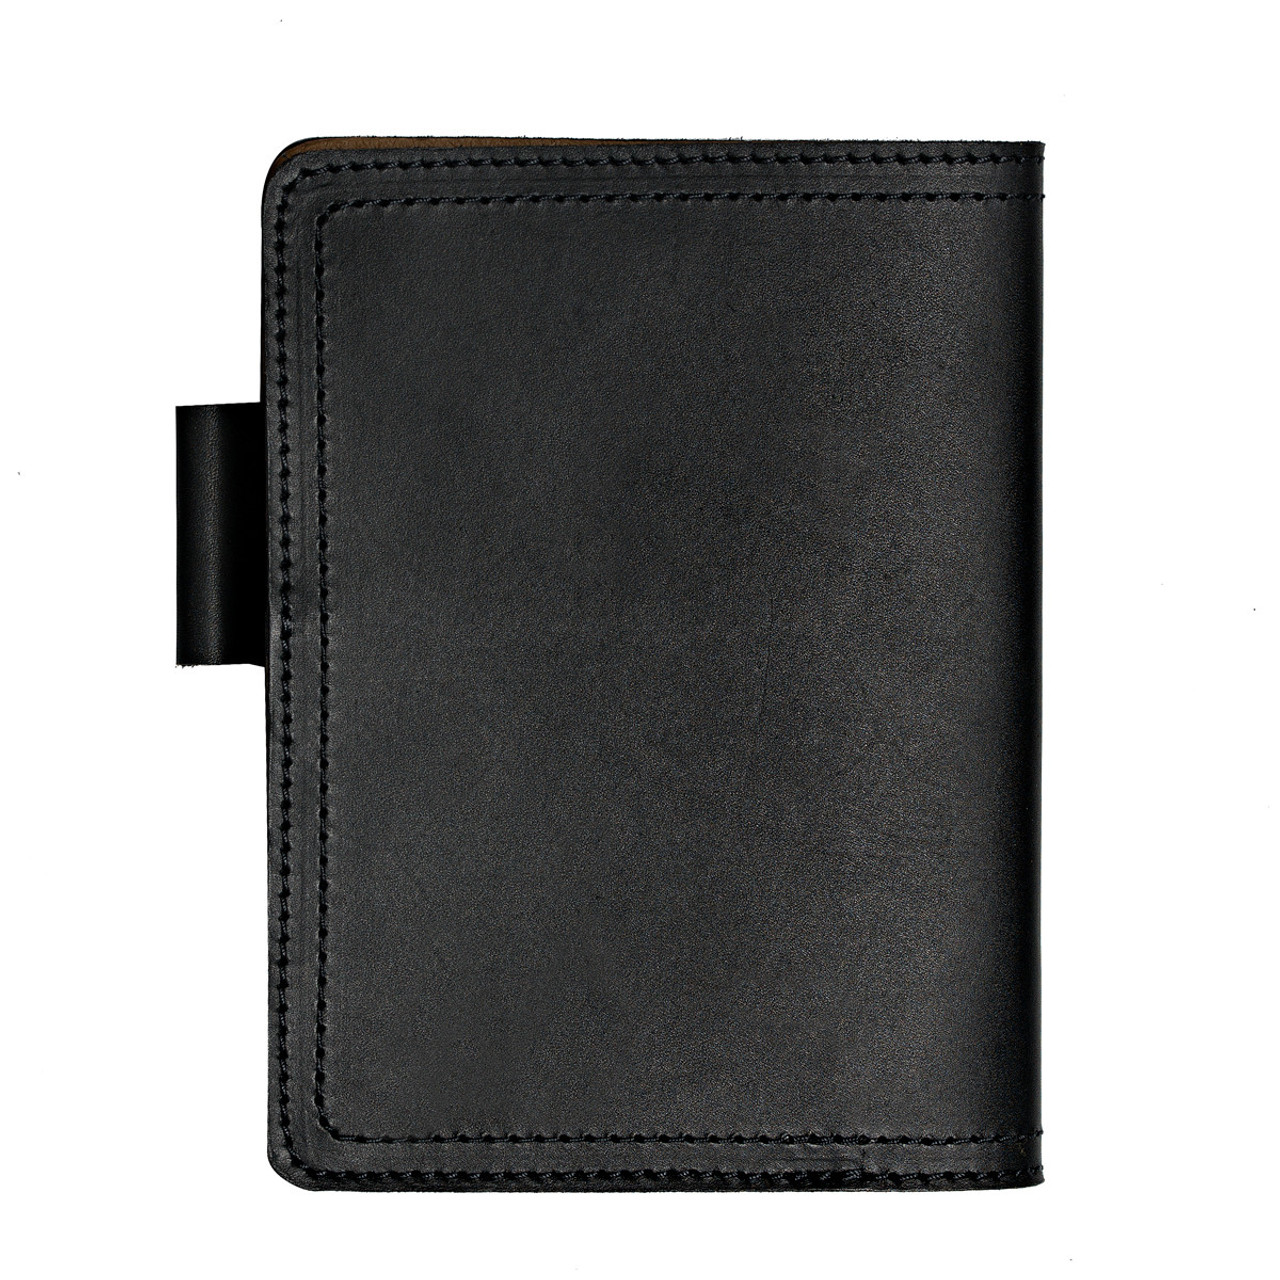 Moleskine Journals: Fascinating Tale of the Leather Moleskine